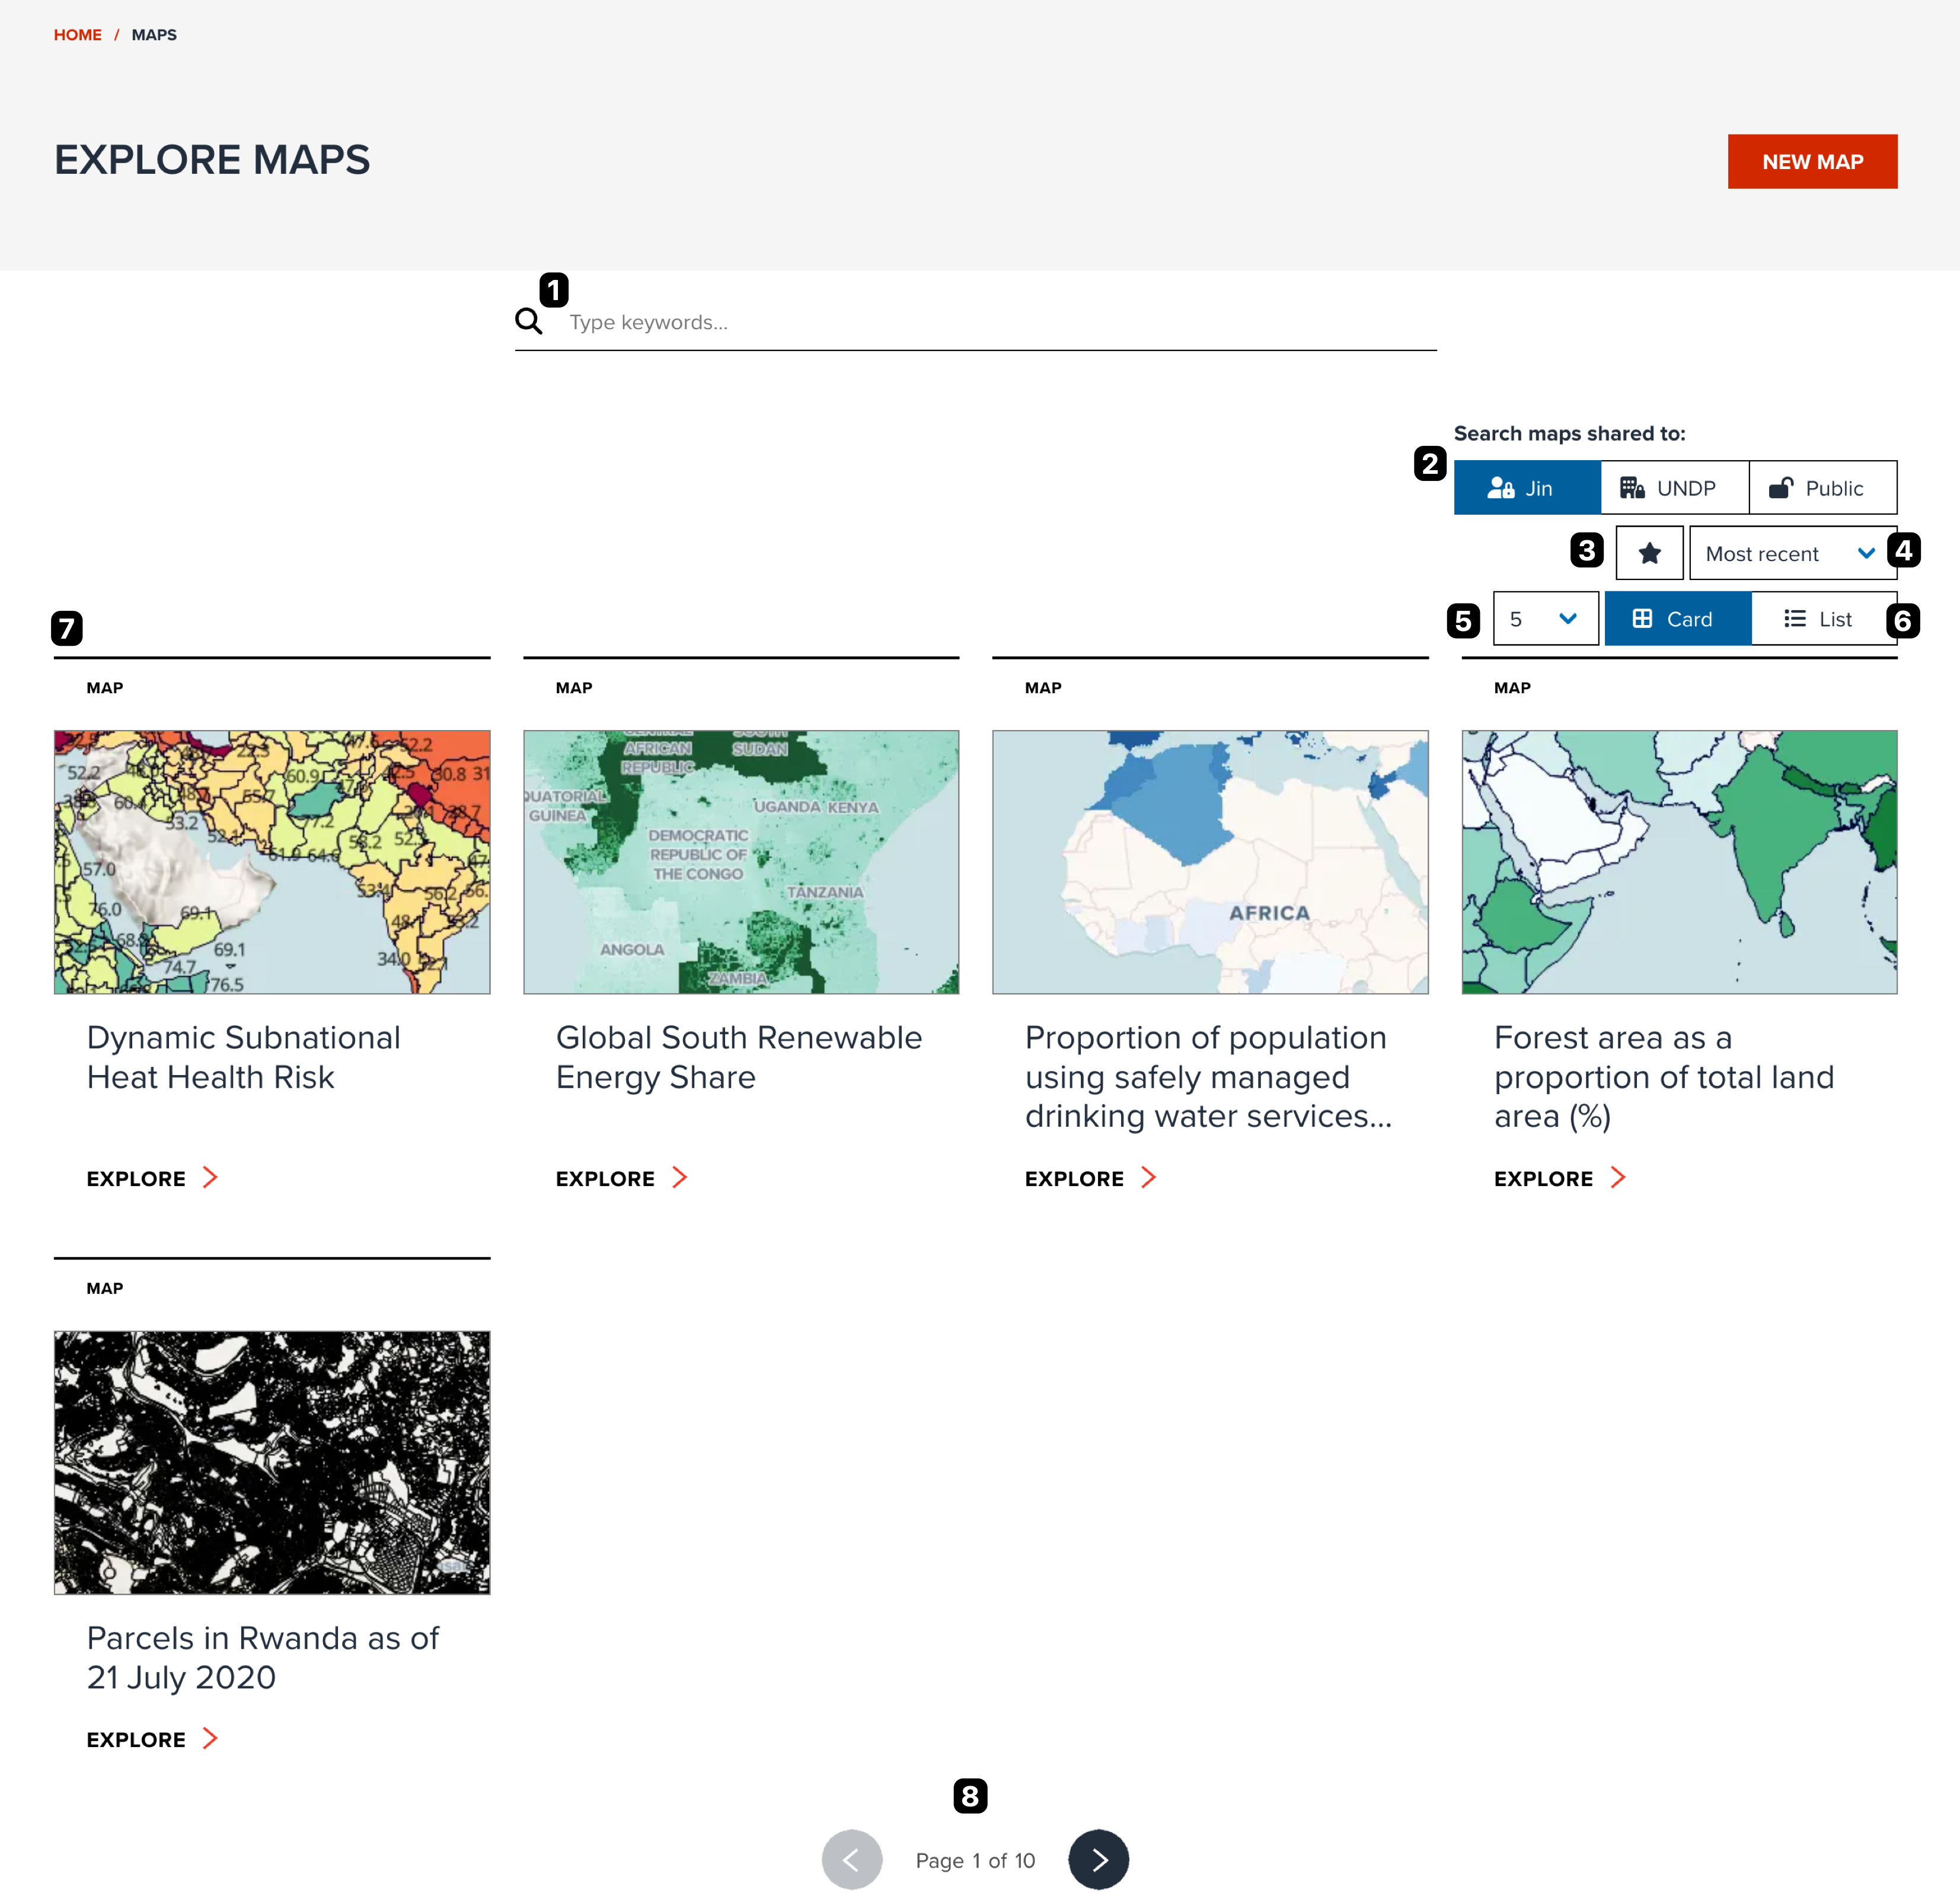 Overview of Maps page to explore existing maps